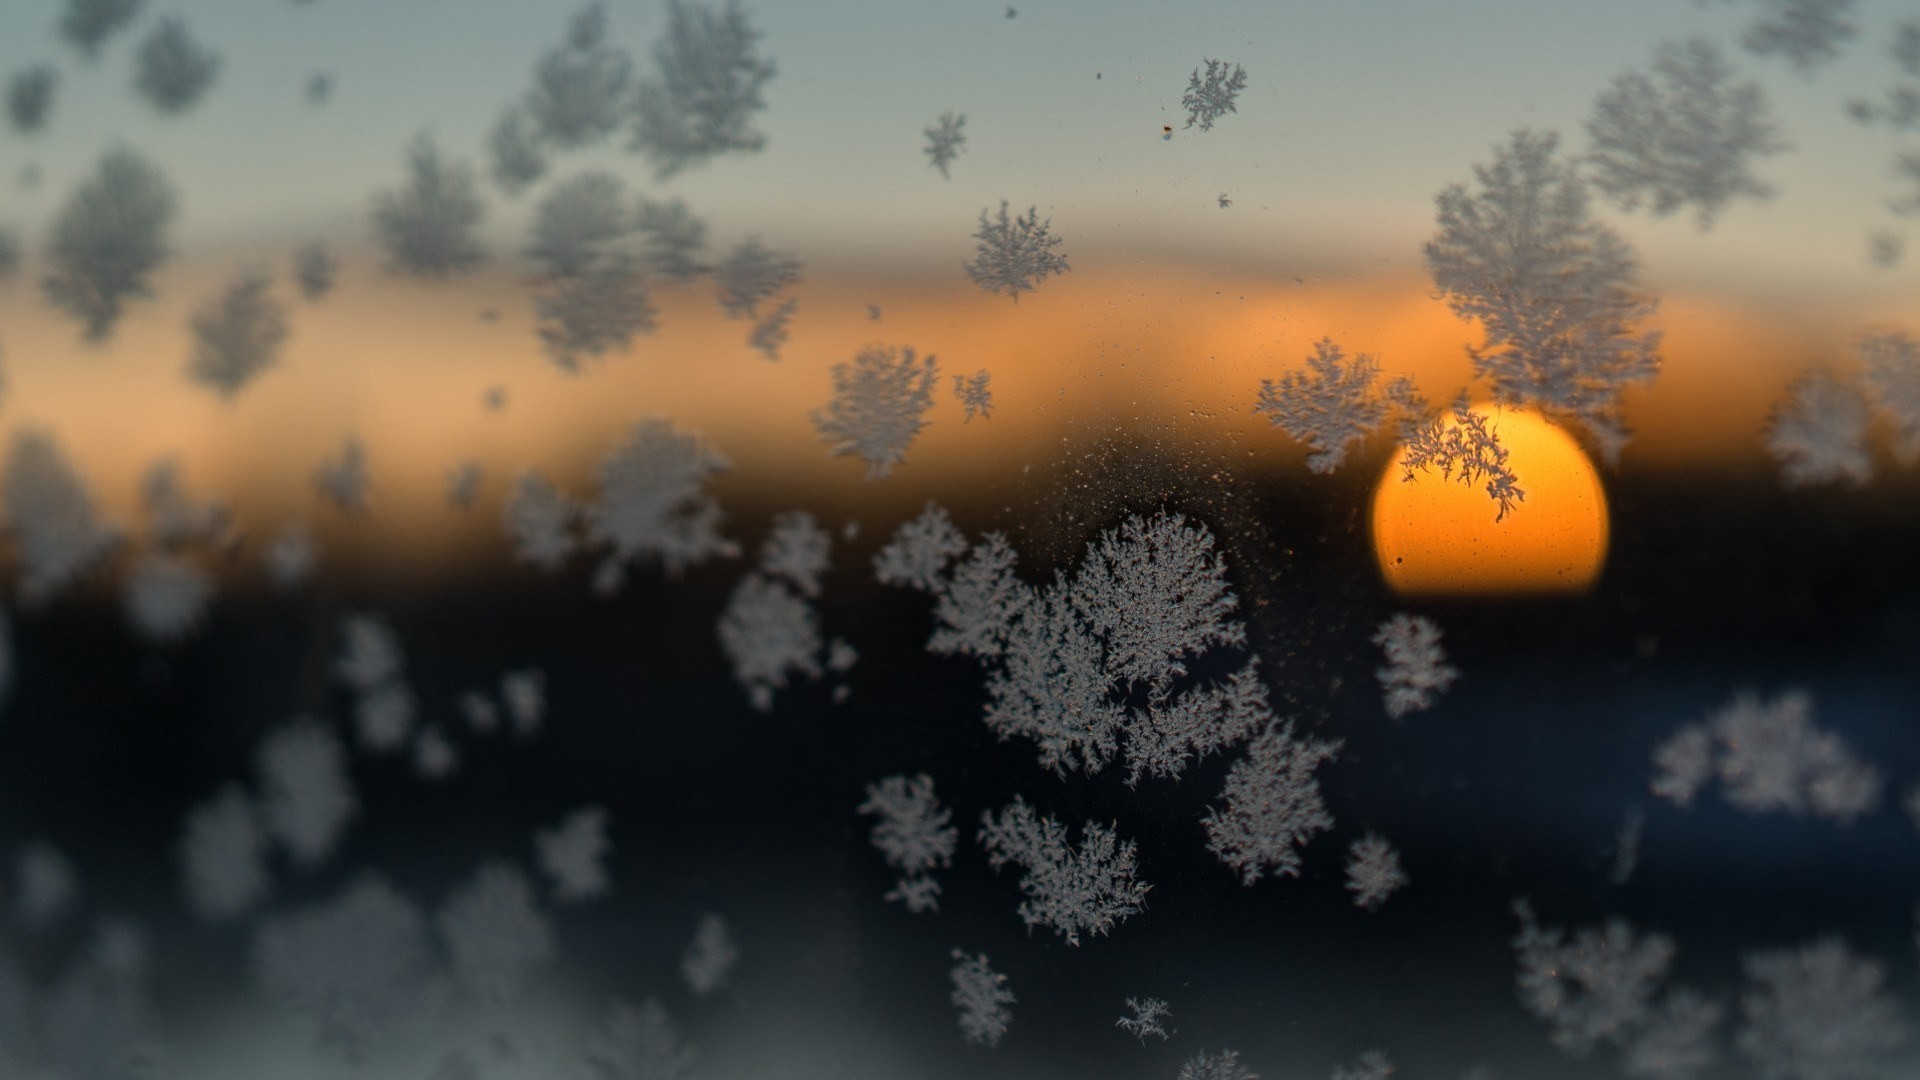 Nature Sun Sunset Glass Winter Snow Flakes Depth Of Field Clouds Blurred Frost Photography Snow 1920x1080